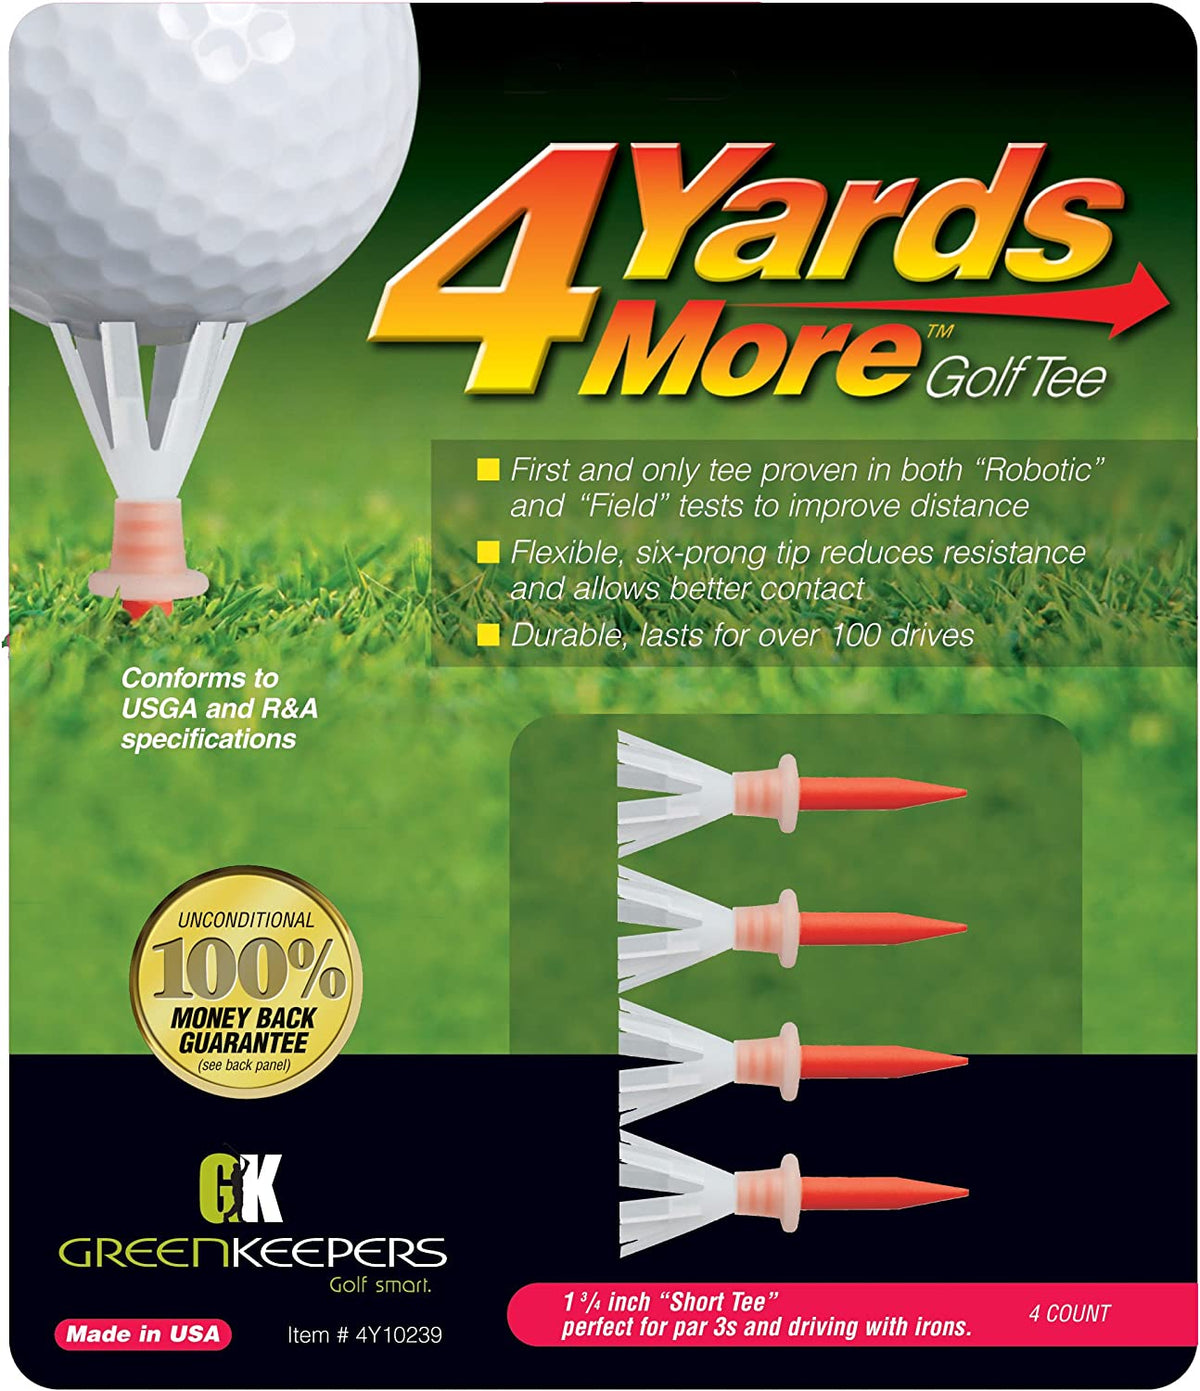 GREEN KEEPERS 4 YARDS MORE GOLF TEES 1 3/4"